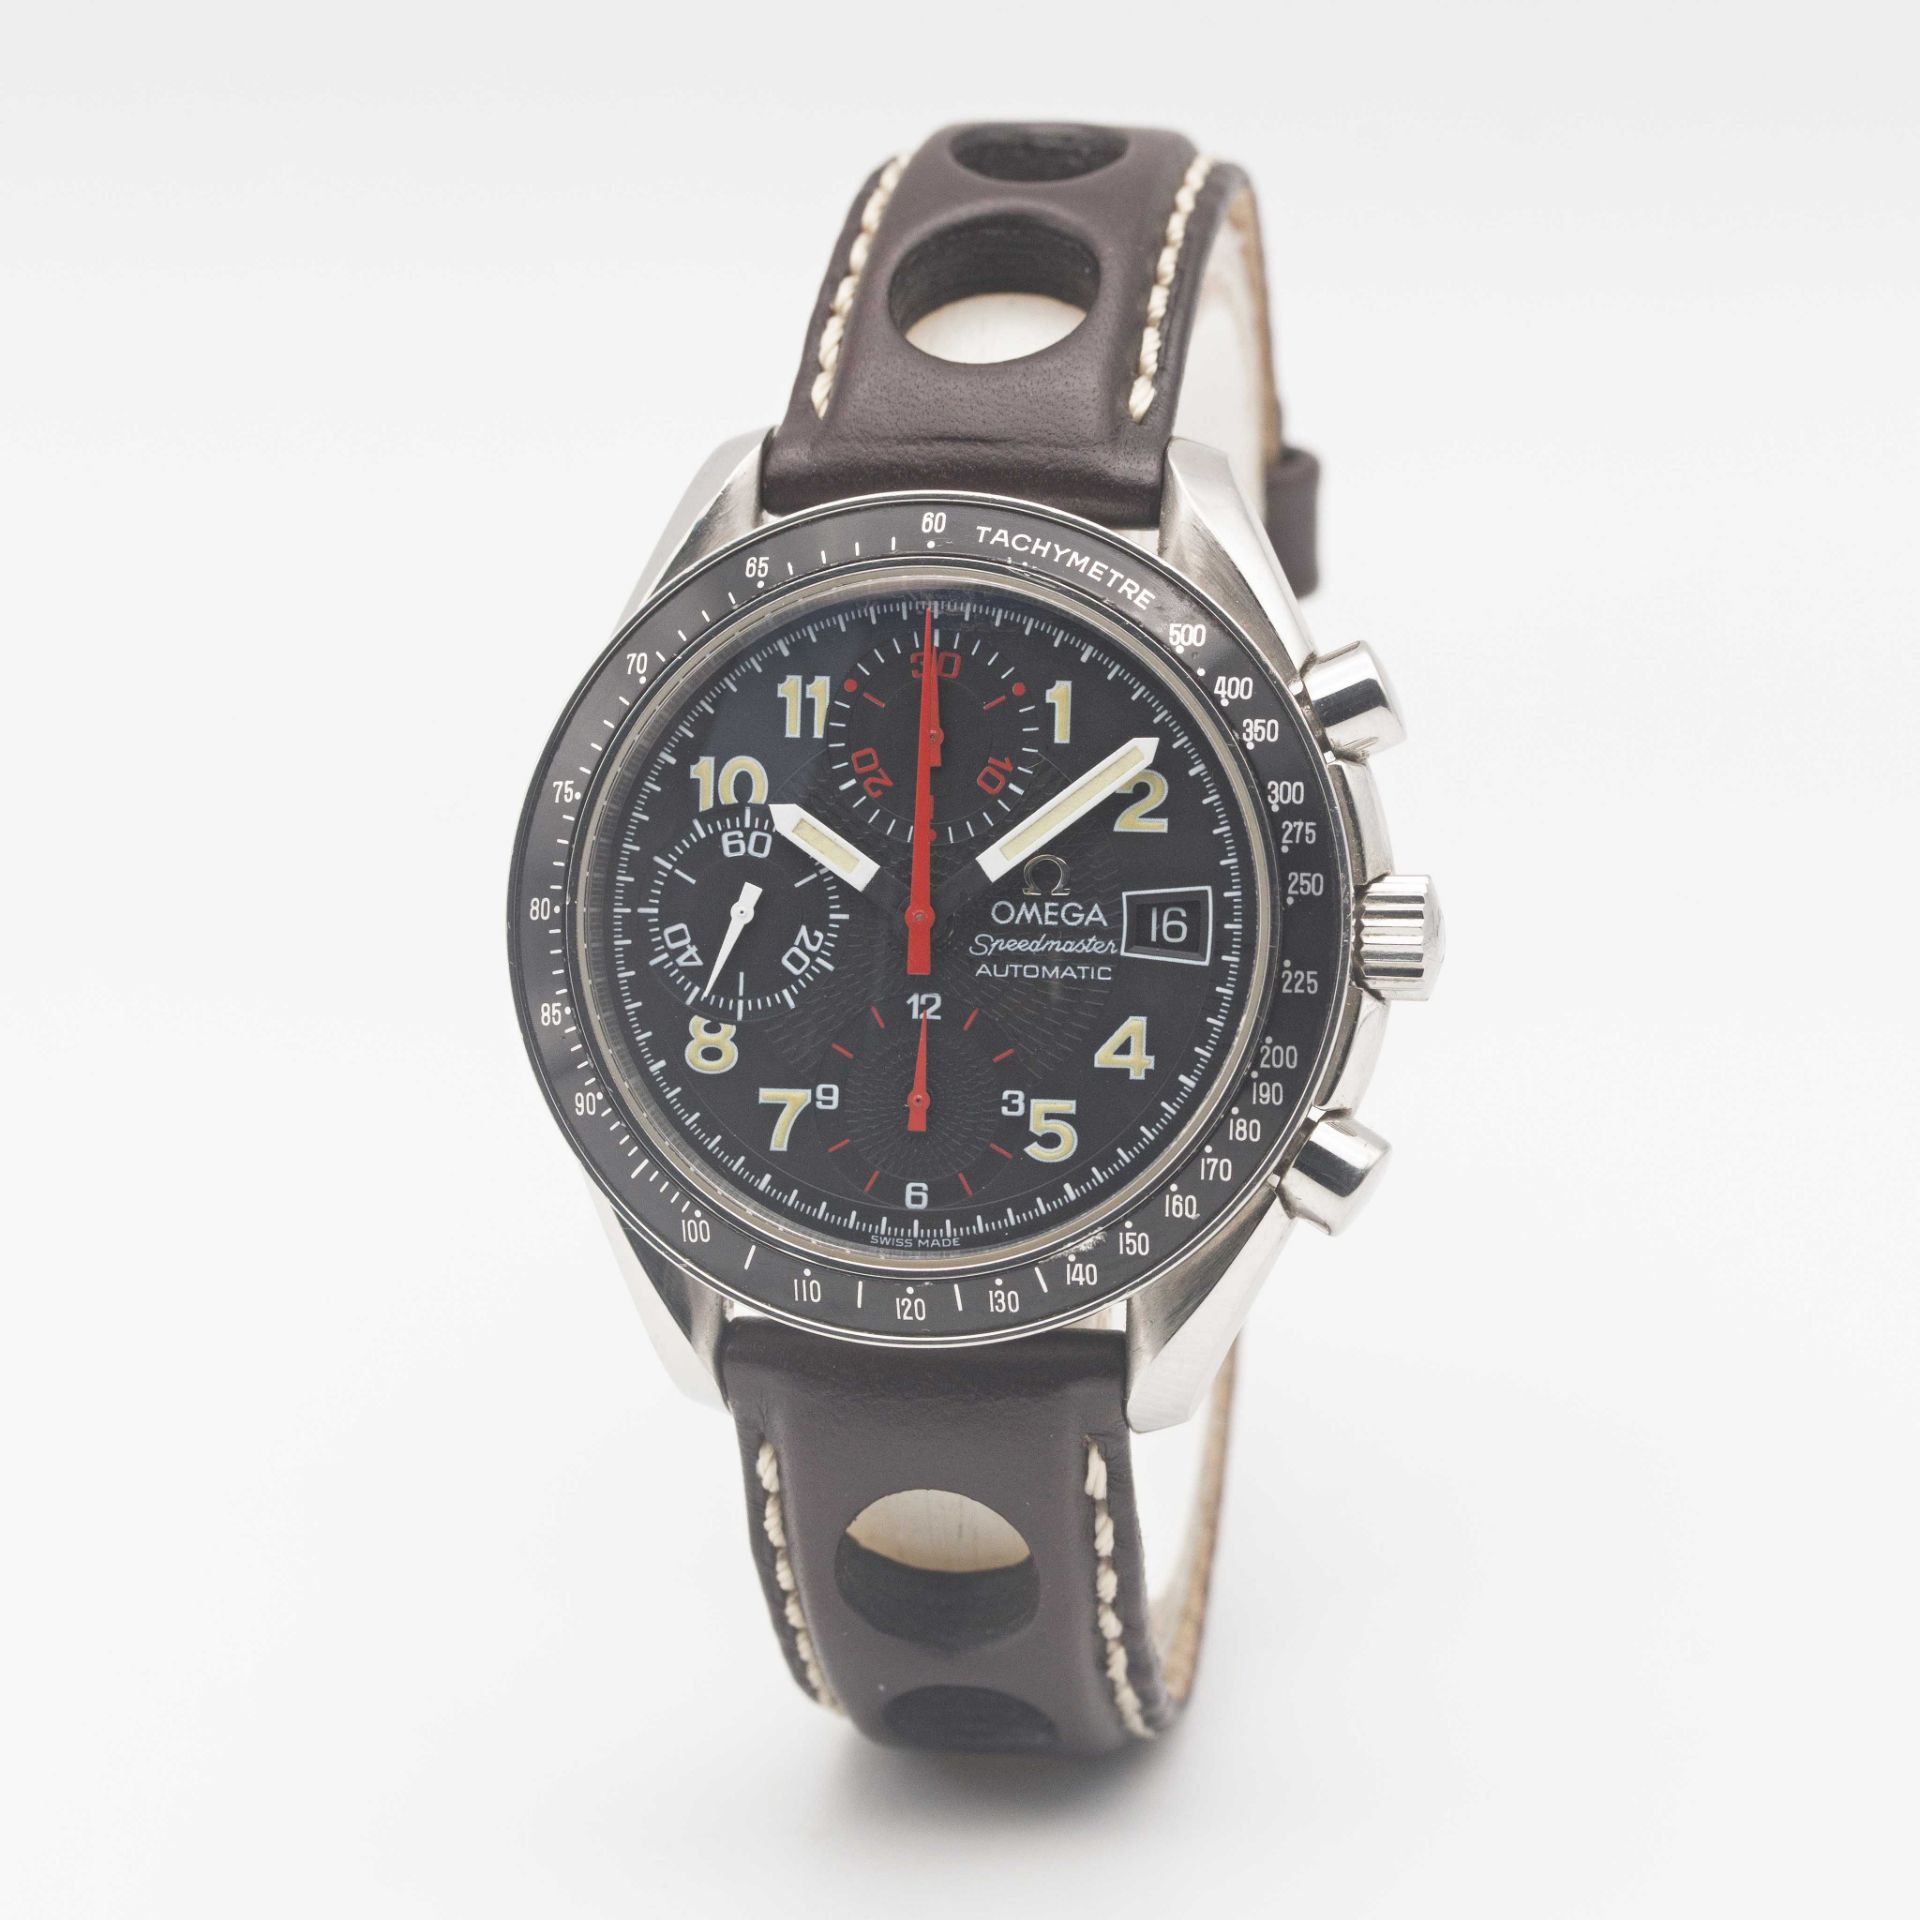 A GENTLEMAN'S STAINLESS STEEL OMEGA SPEEDMASTER AUTOMATIC CHRONOGRAPH WRIST WATCH CIRCA 1999 - Image 4 of 9